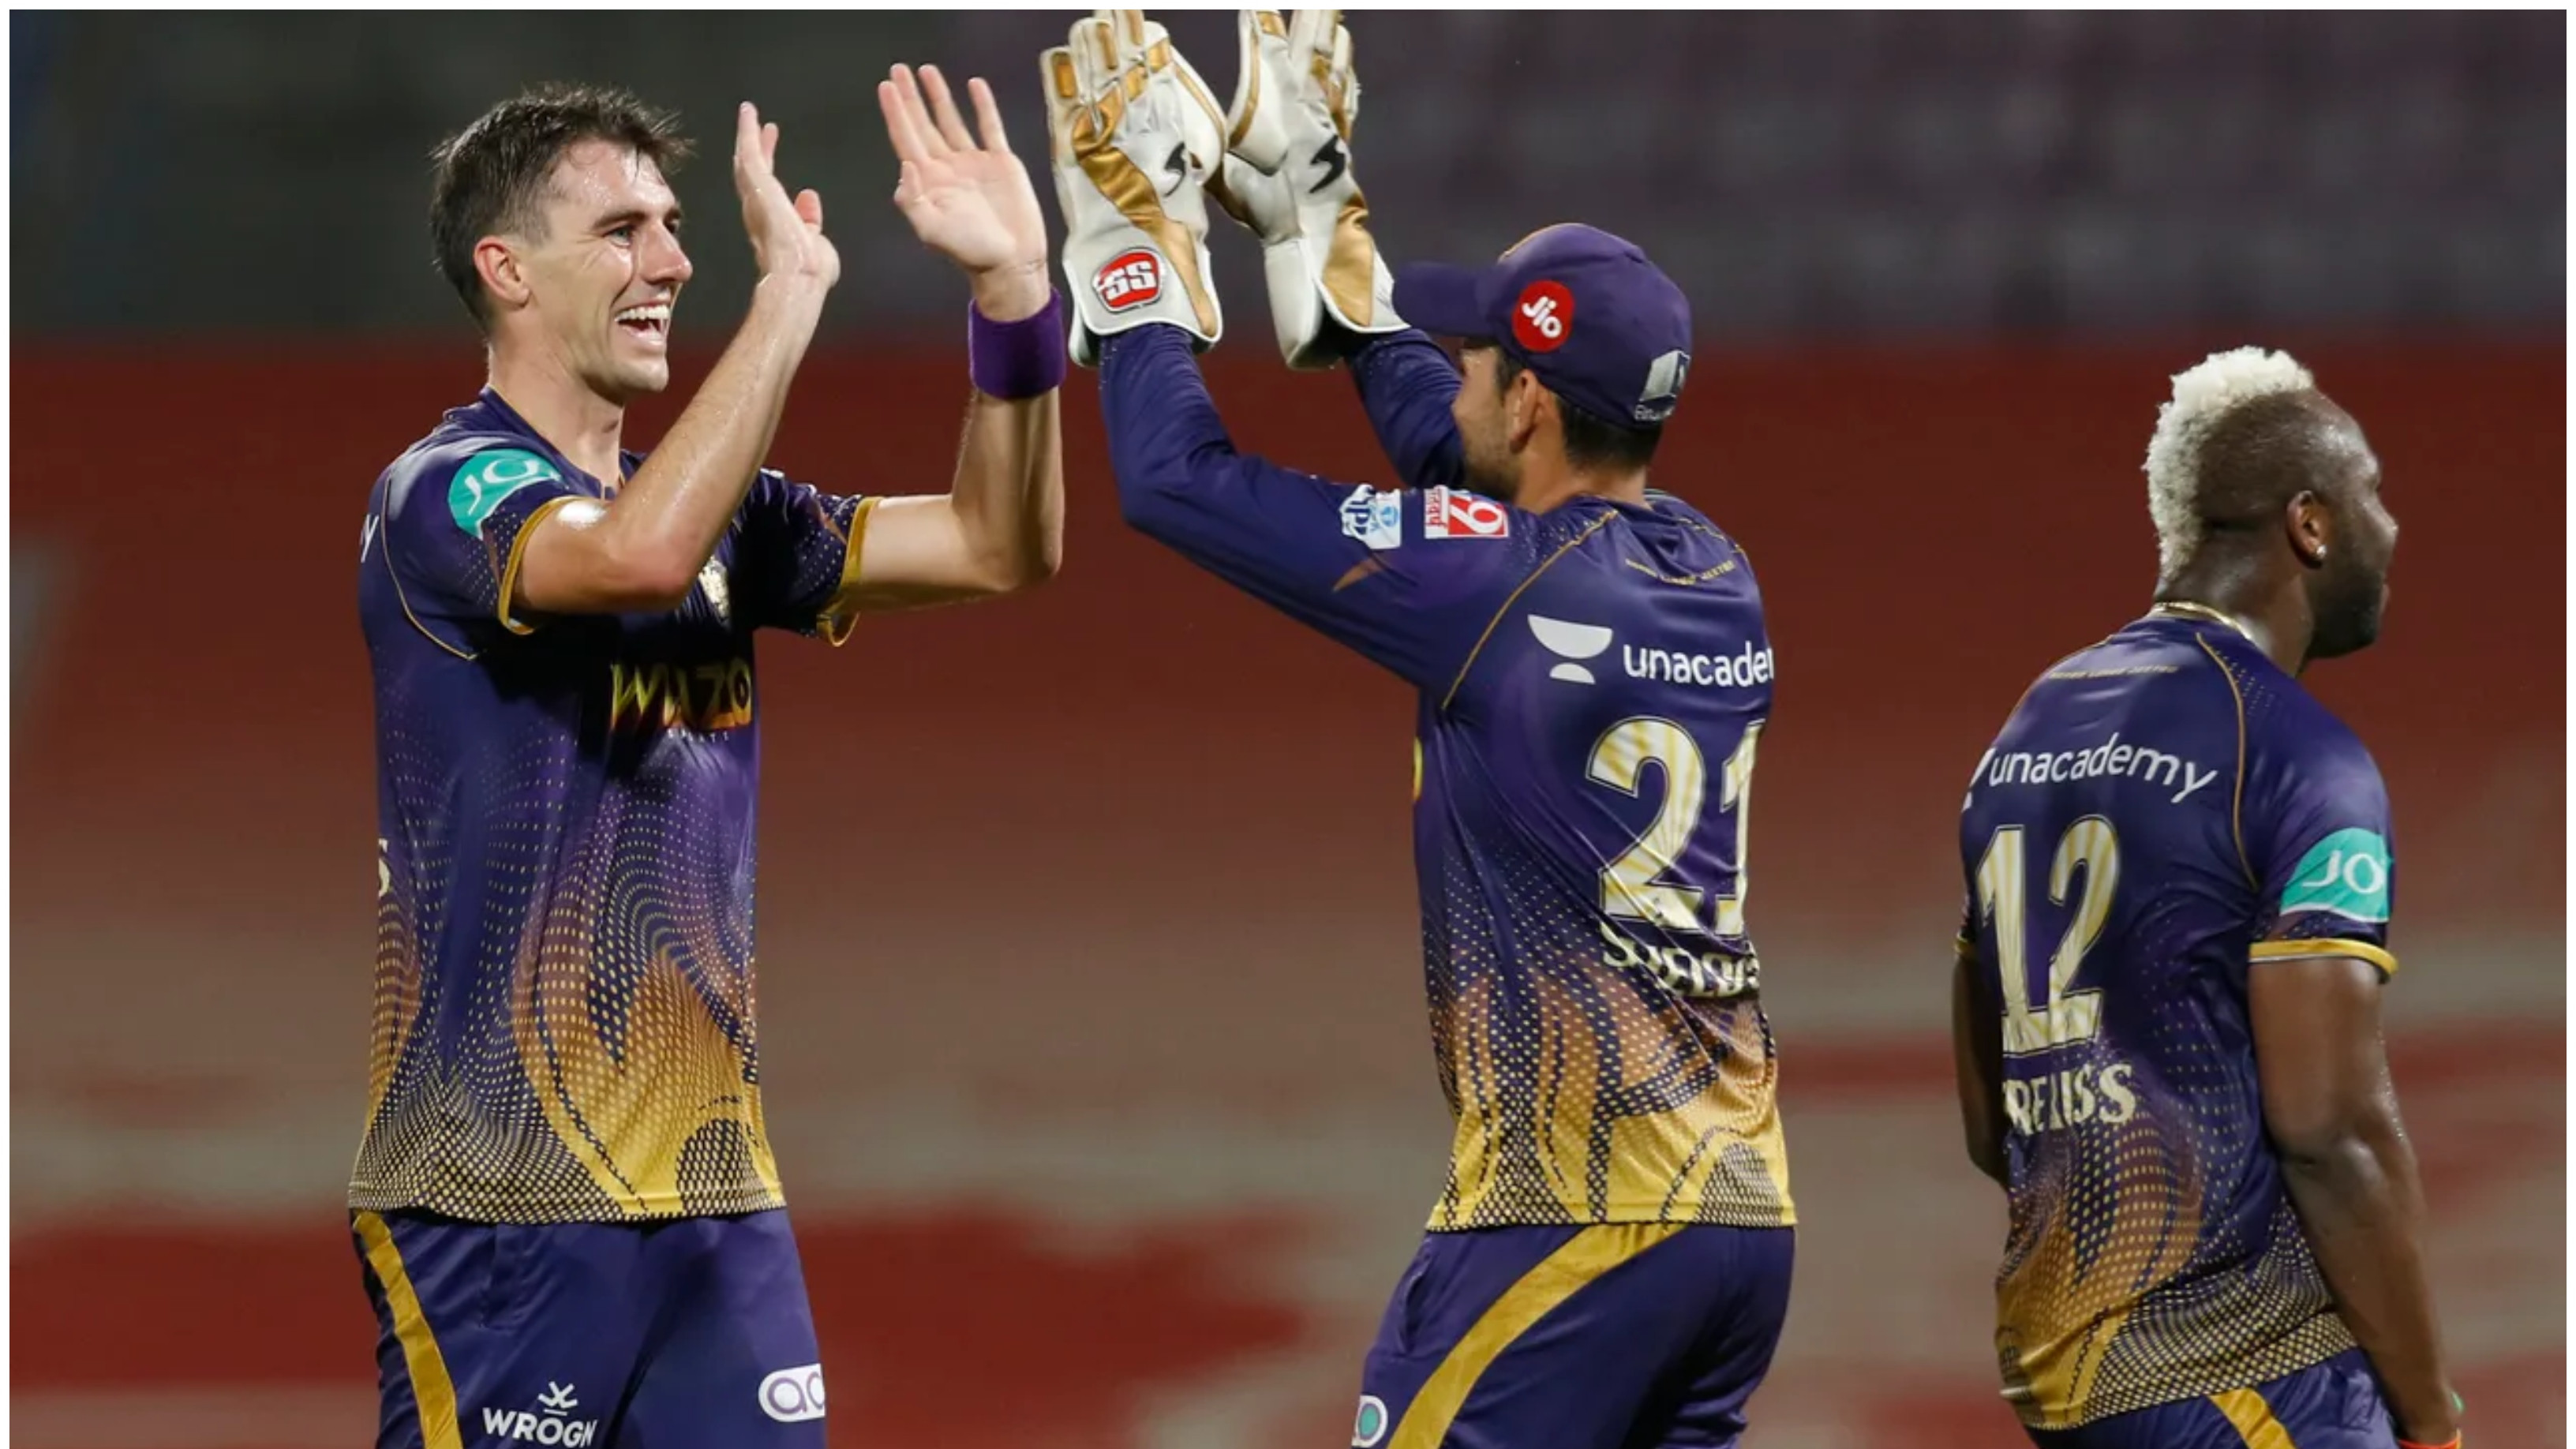 IPL 2022: Bowlers shine as KKR rout MI by 52 runs to keep play-offs hopes alive